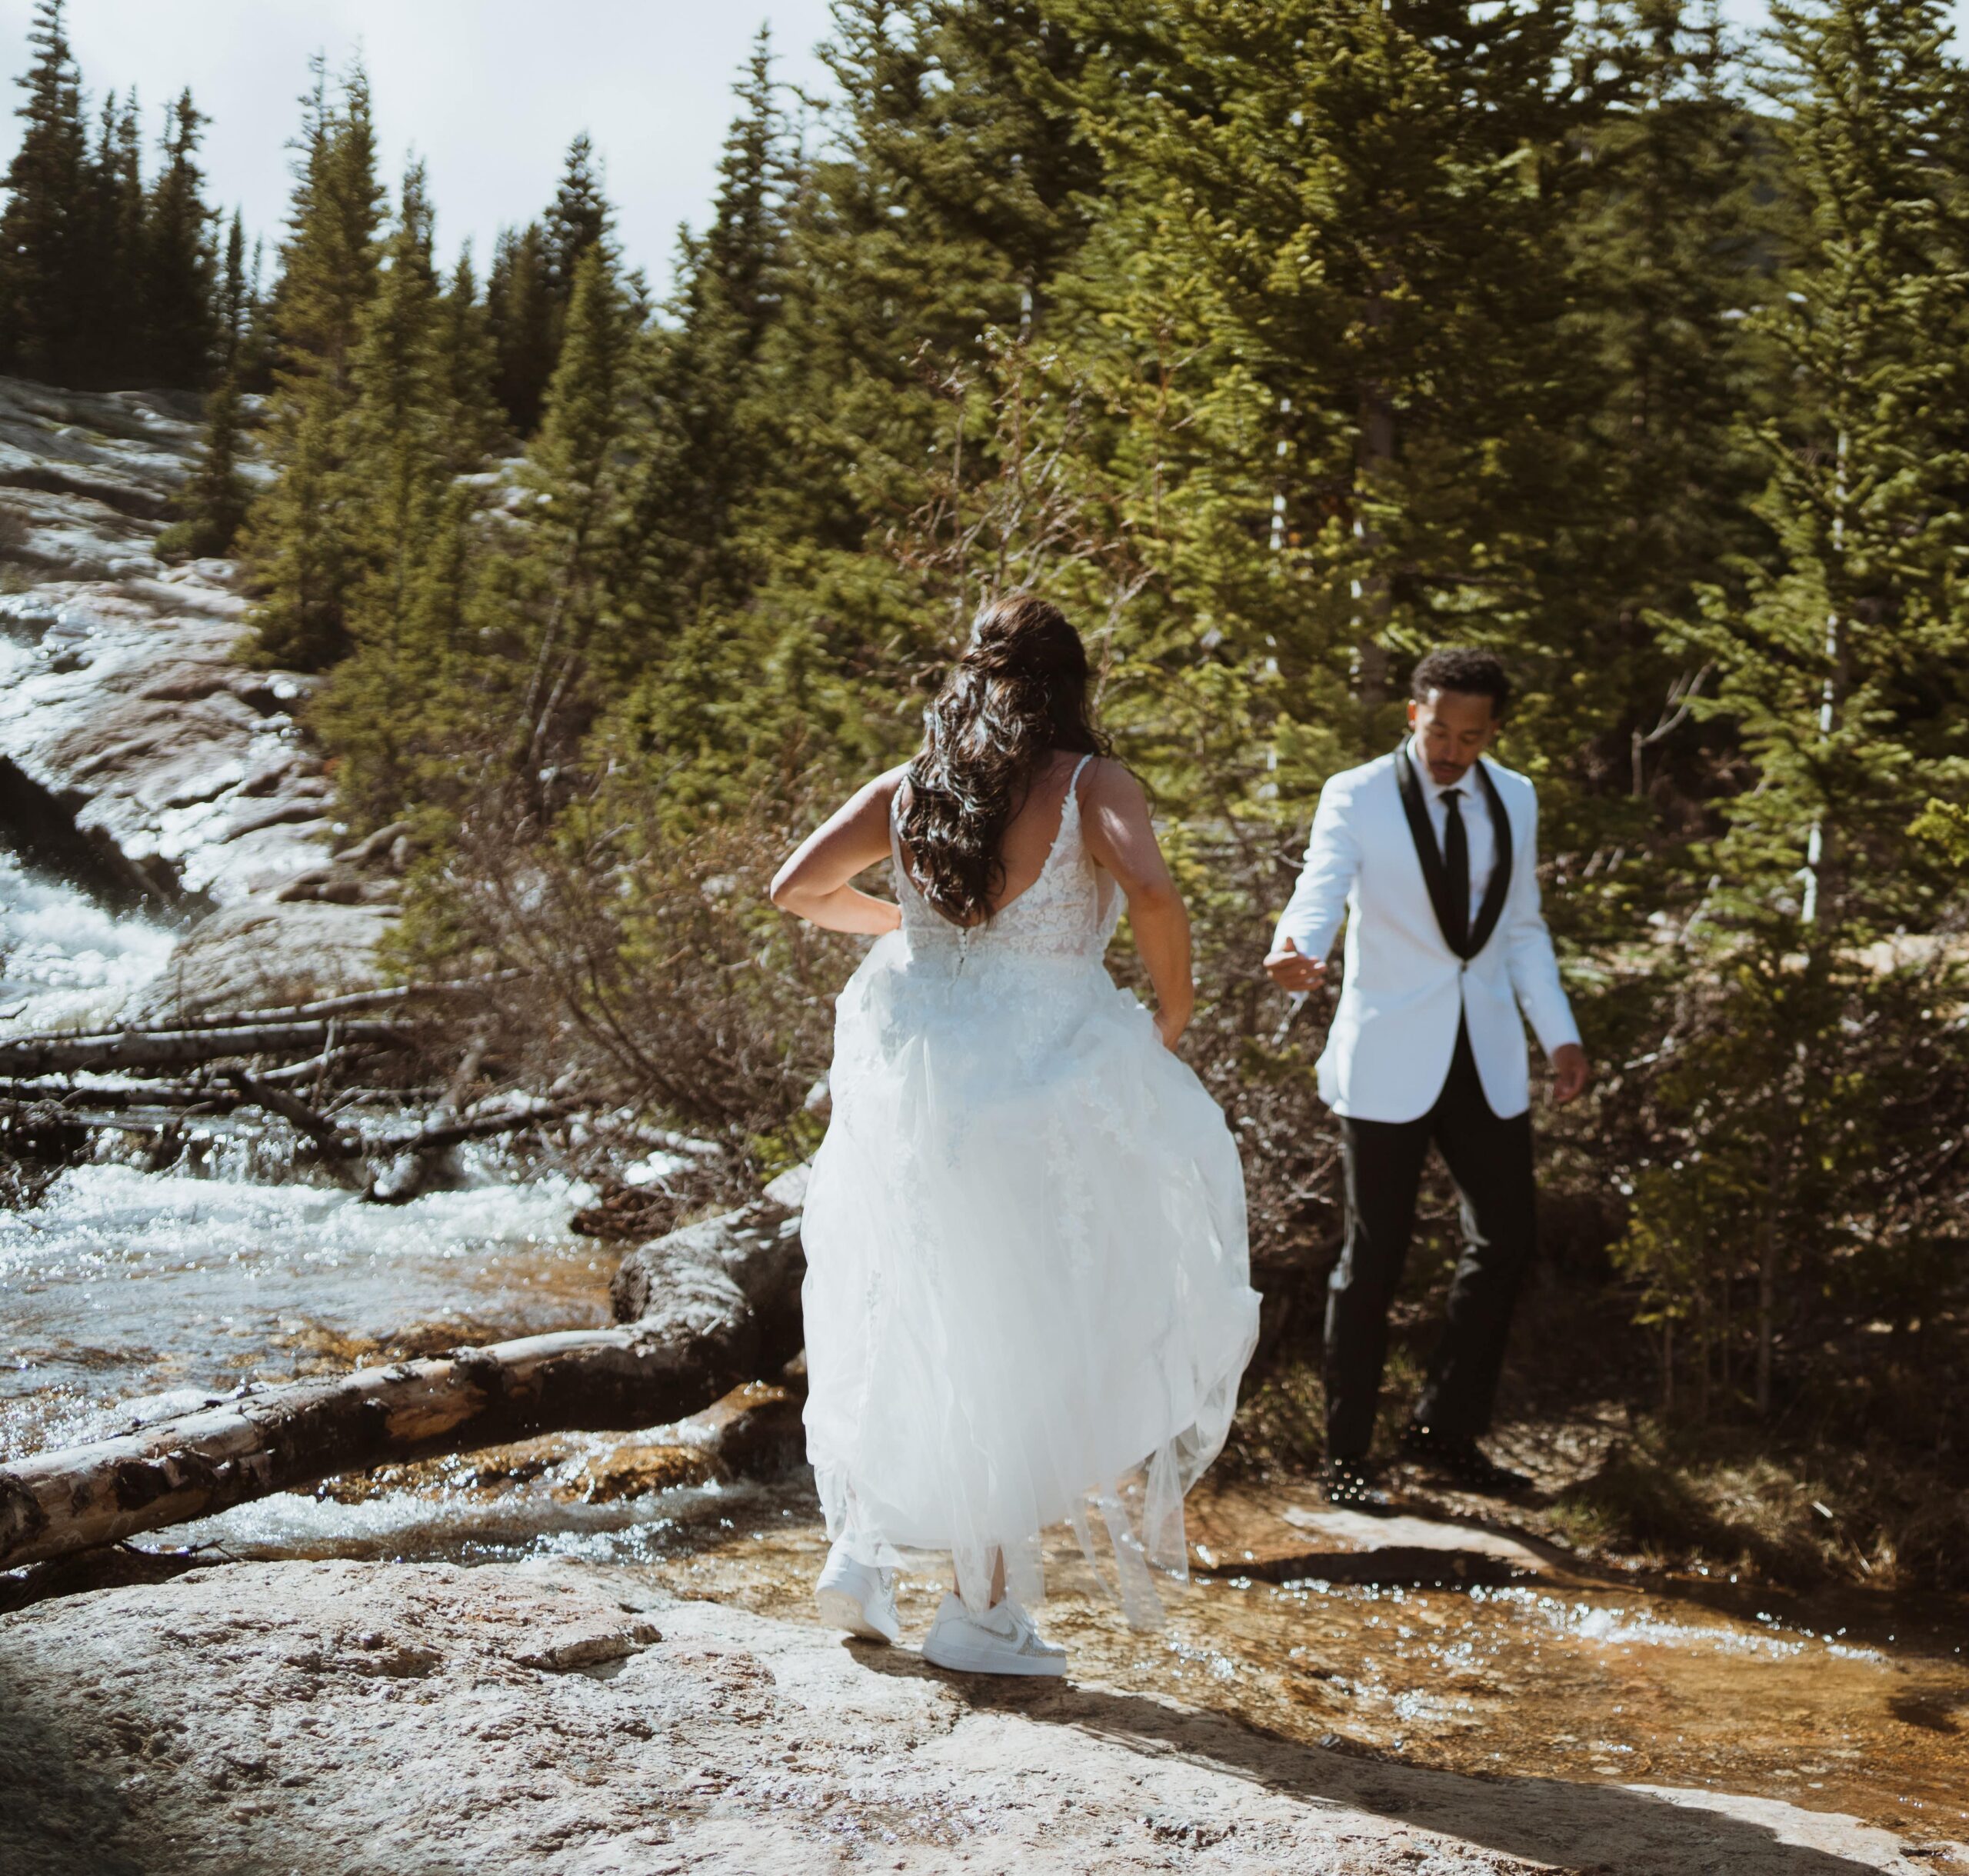 secret waterfall in breckenridge colorado. adventure elopement. the couple hiked in their wedding attire in june.